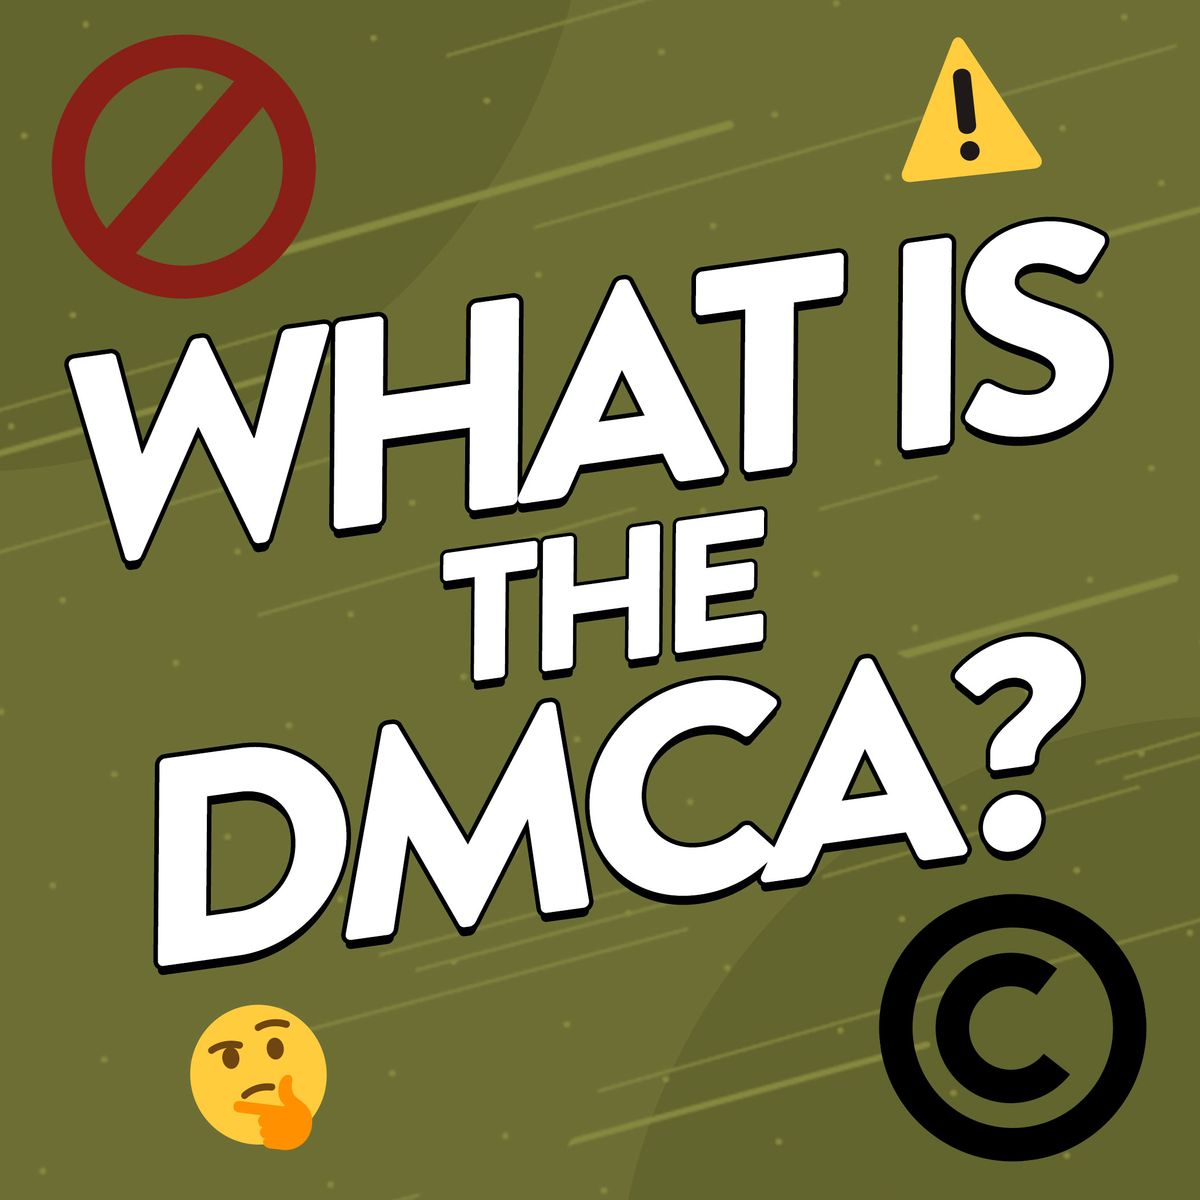 Images related to copyright in content with text that says 'What is the DMCA' over the top.